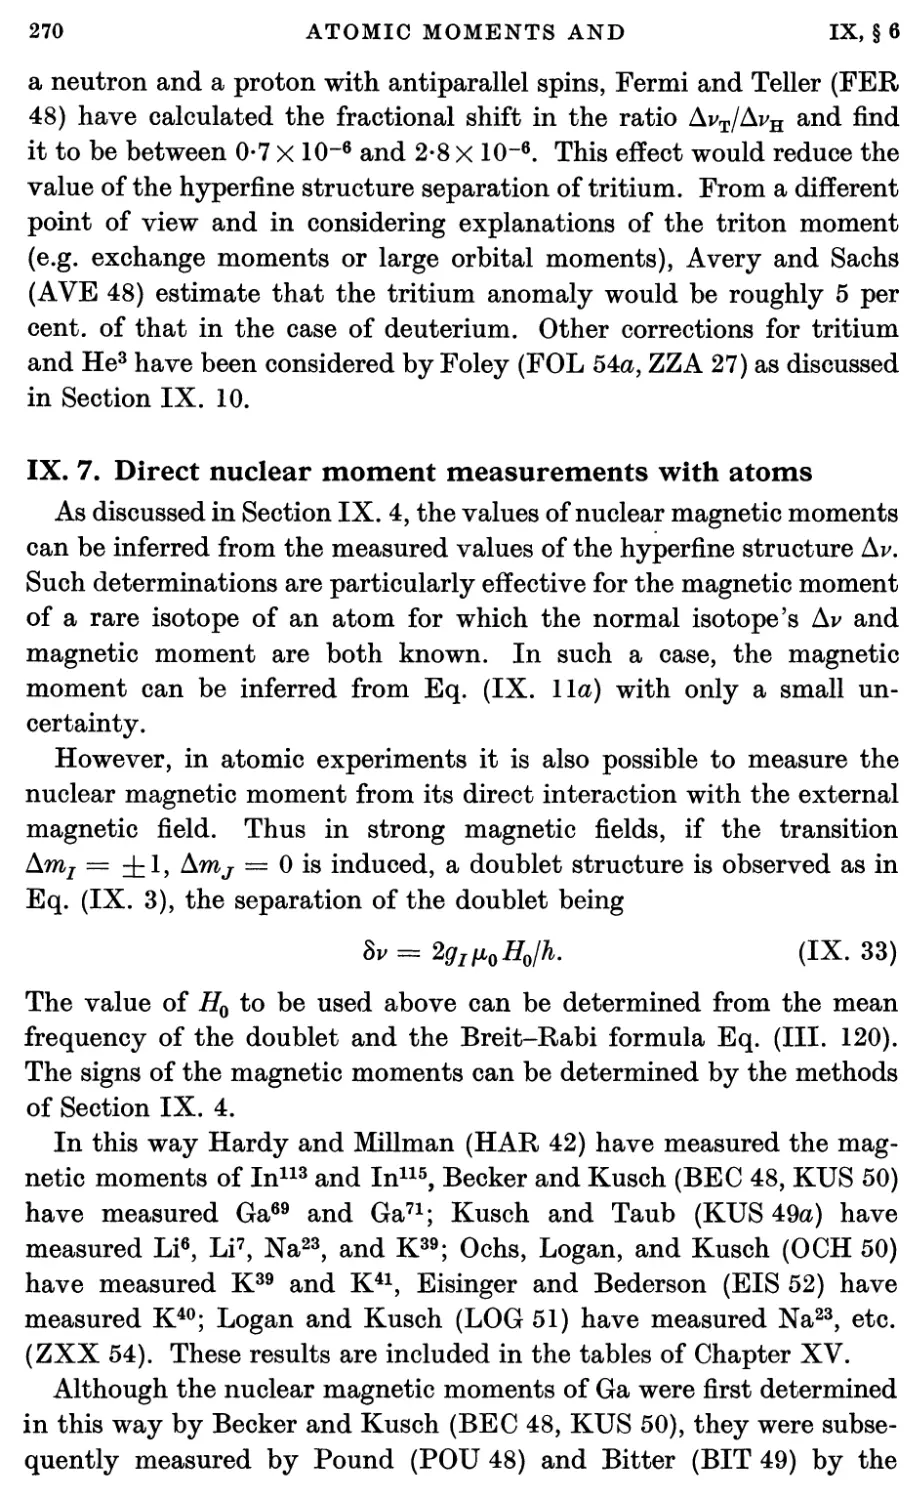 IX.7. Direct Nuclear Moment Measurements with Atoms